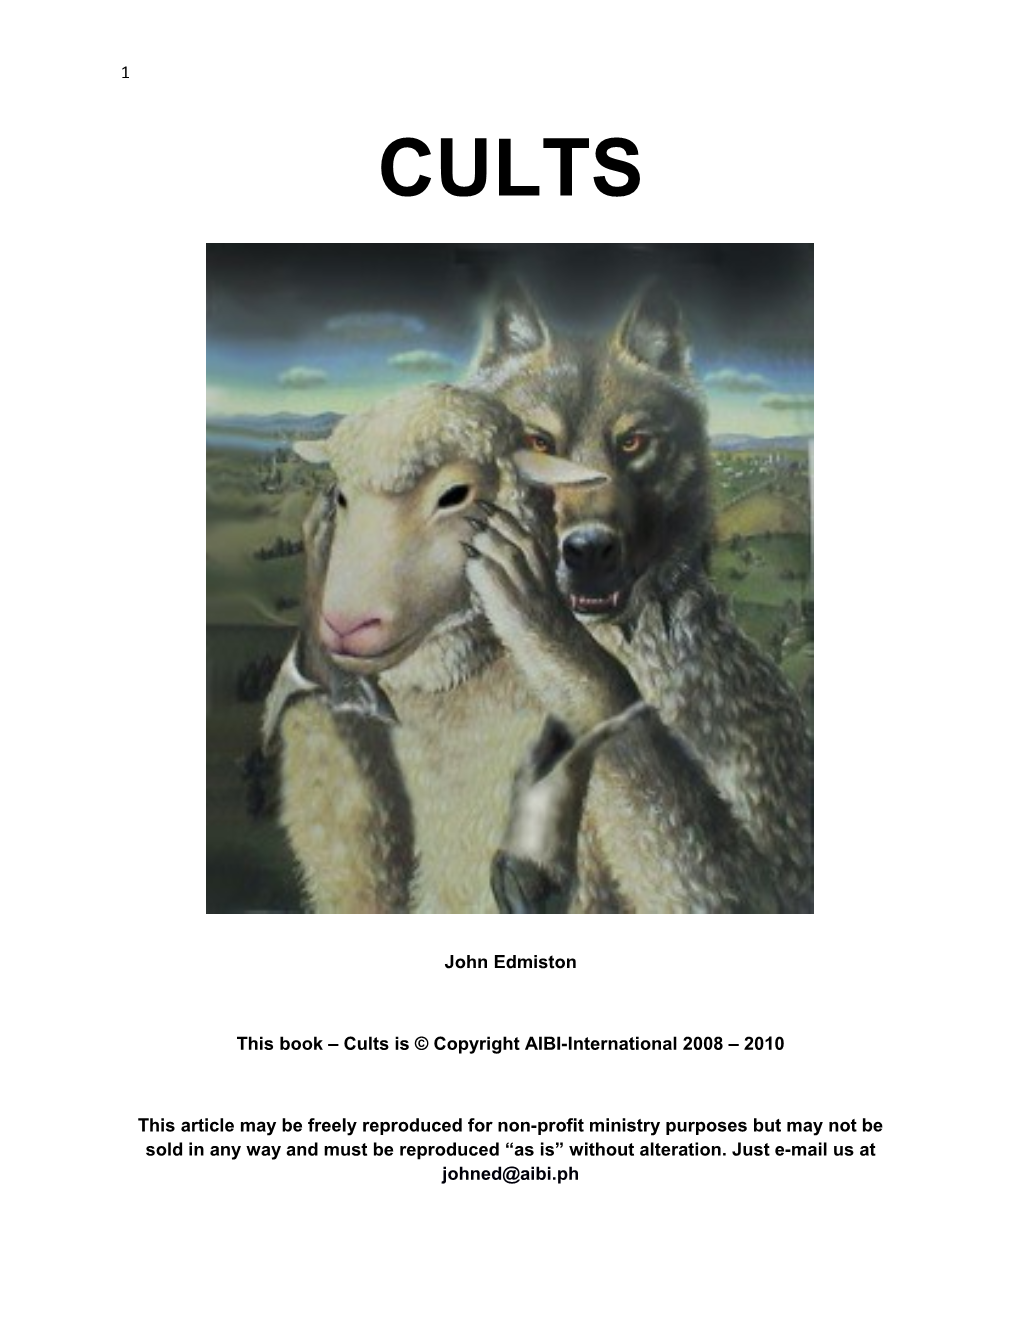 This Book Cults Is Copyright AIBI-International 2008 2010